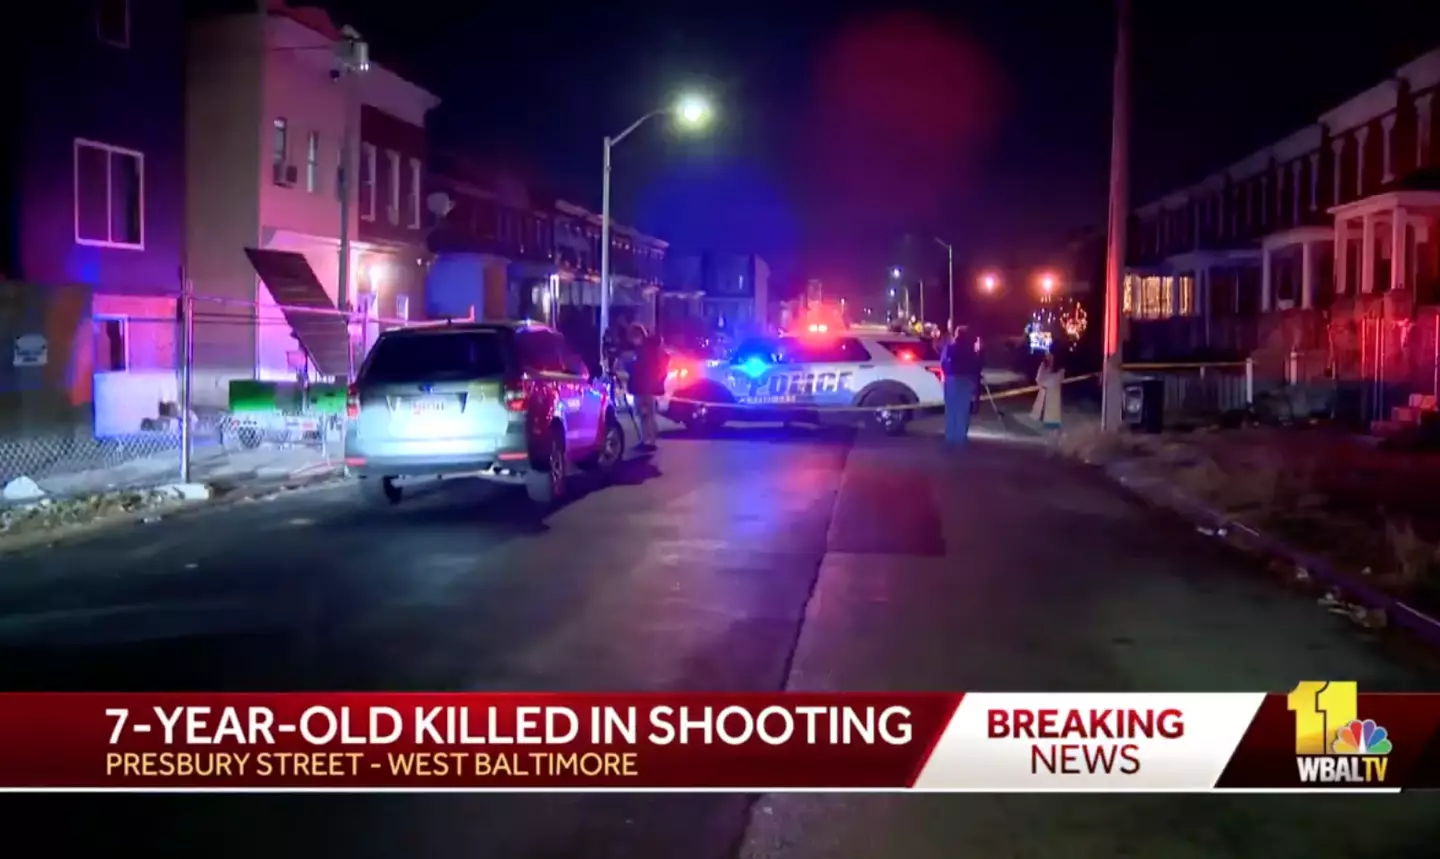 The seven-year-old boy was fatally shot in the head.